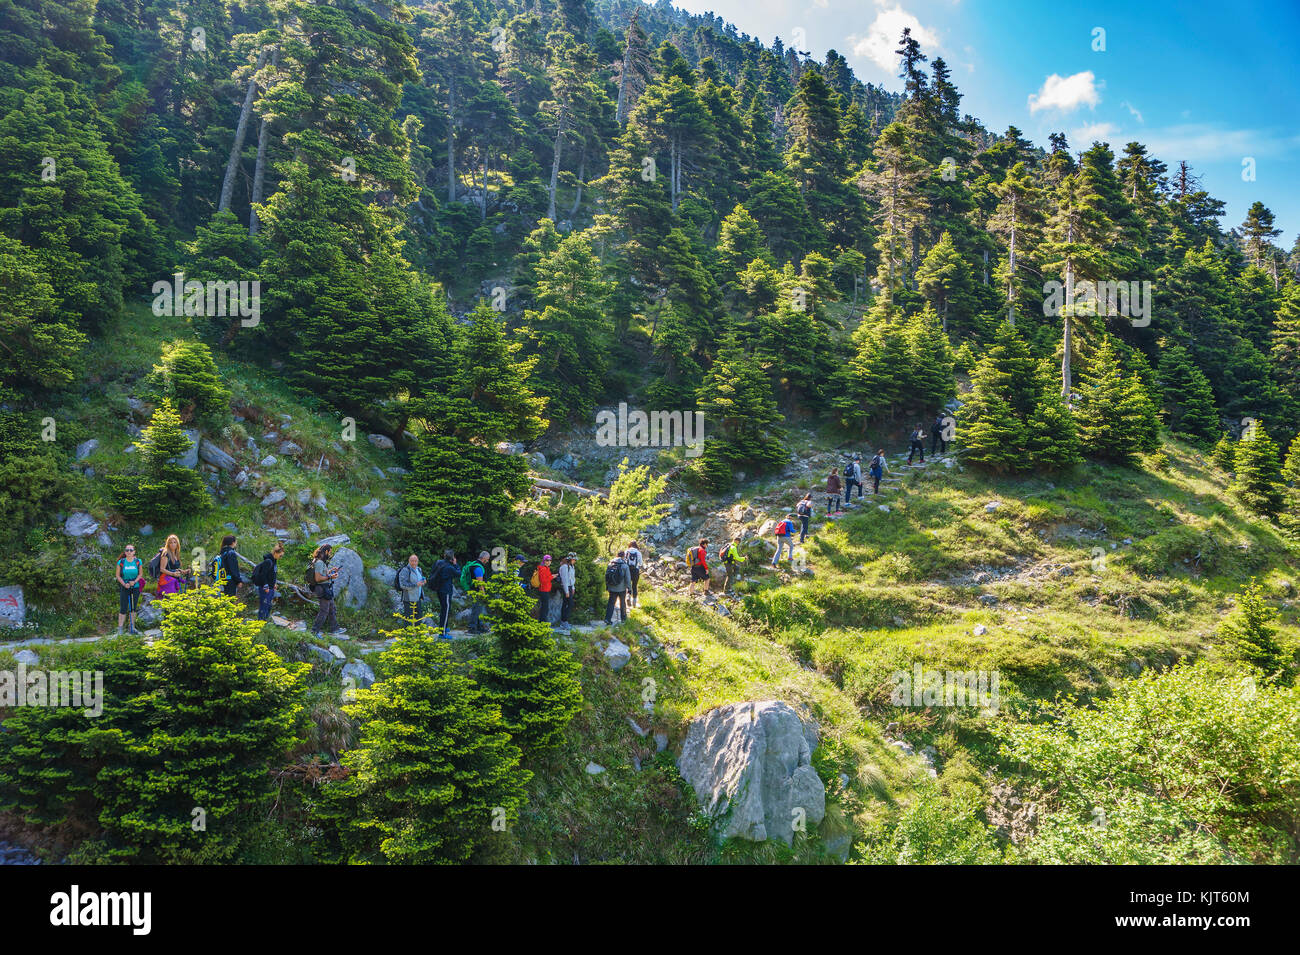 The famous Dirfys forest. It is a natural forest located on a mountain in the central part of the island of Euboea, Greece at 1,743 m elevation Stock Photo